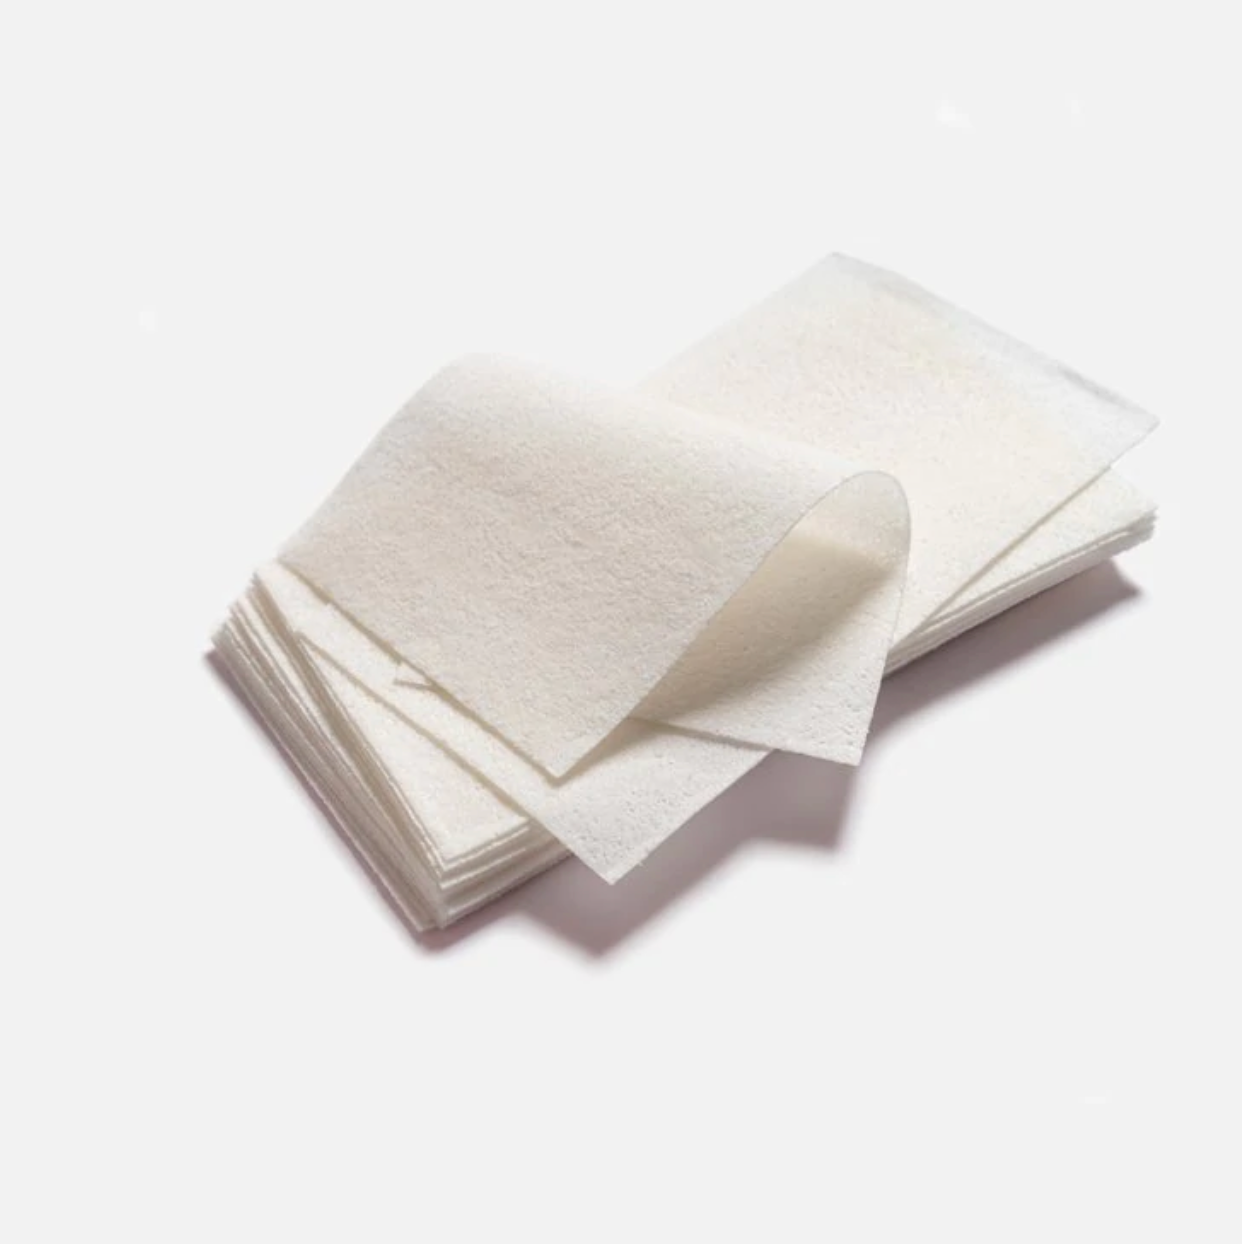 Naturally Scented Laundry Sheets - Pack of 64